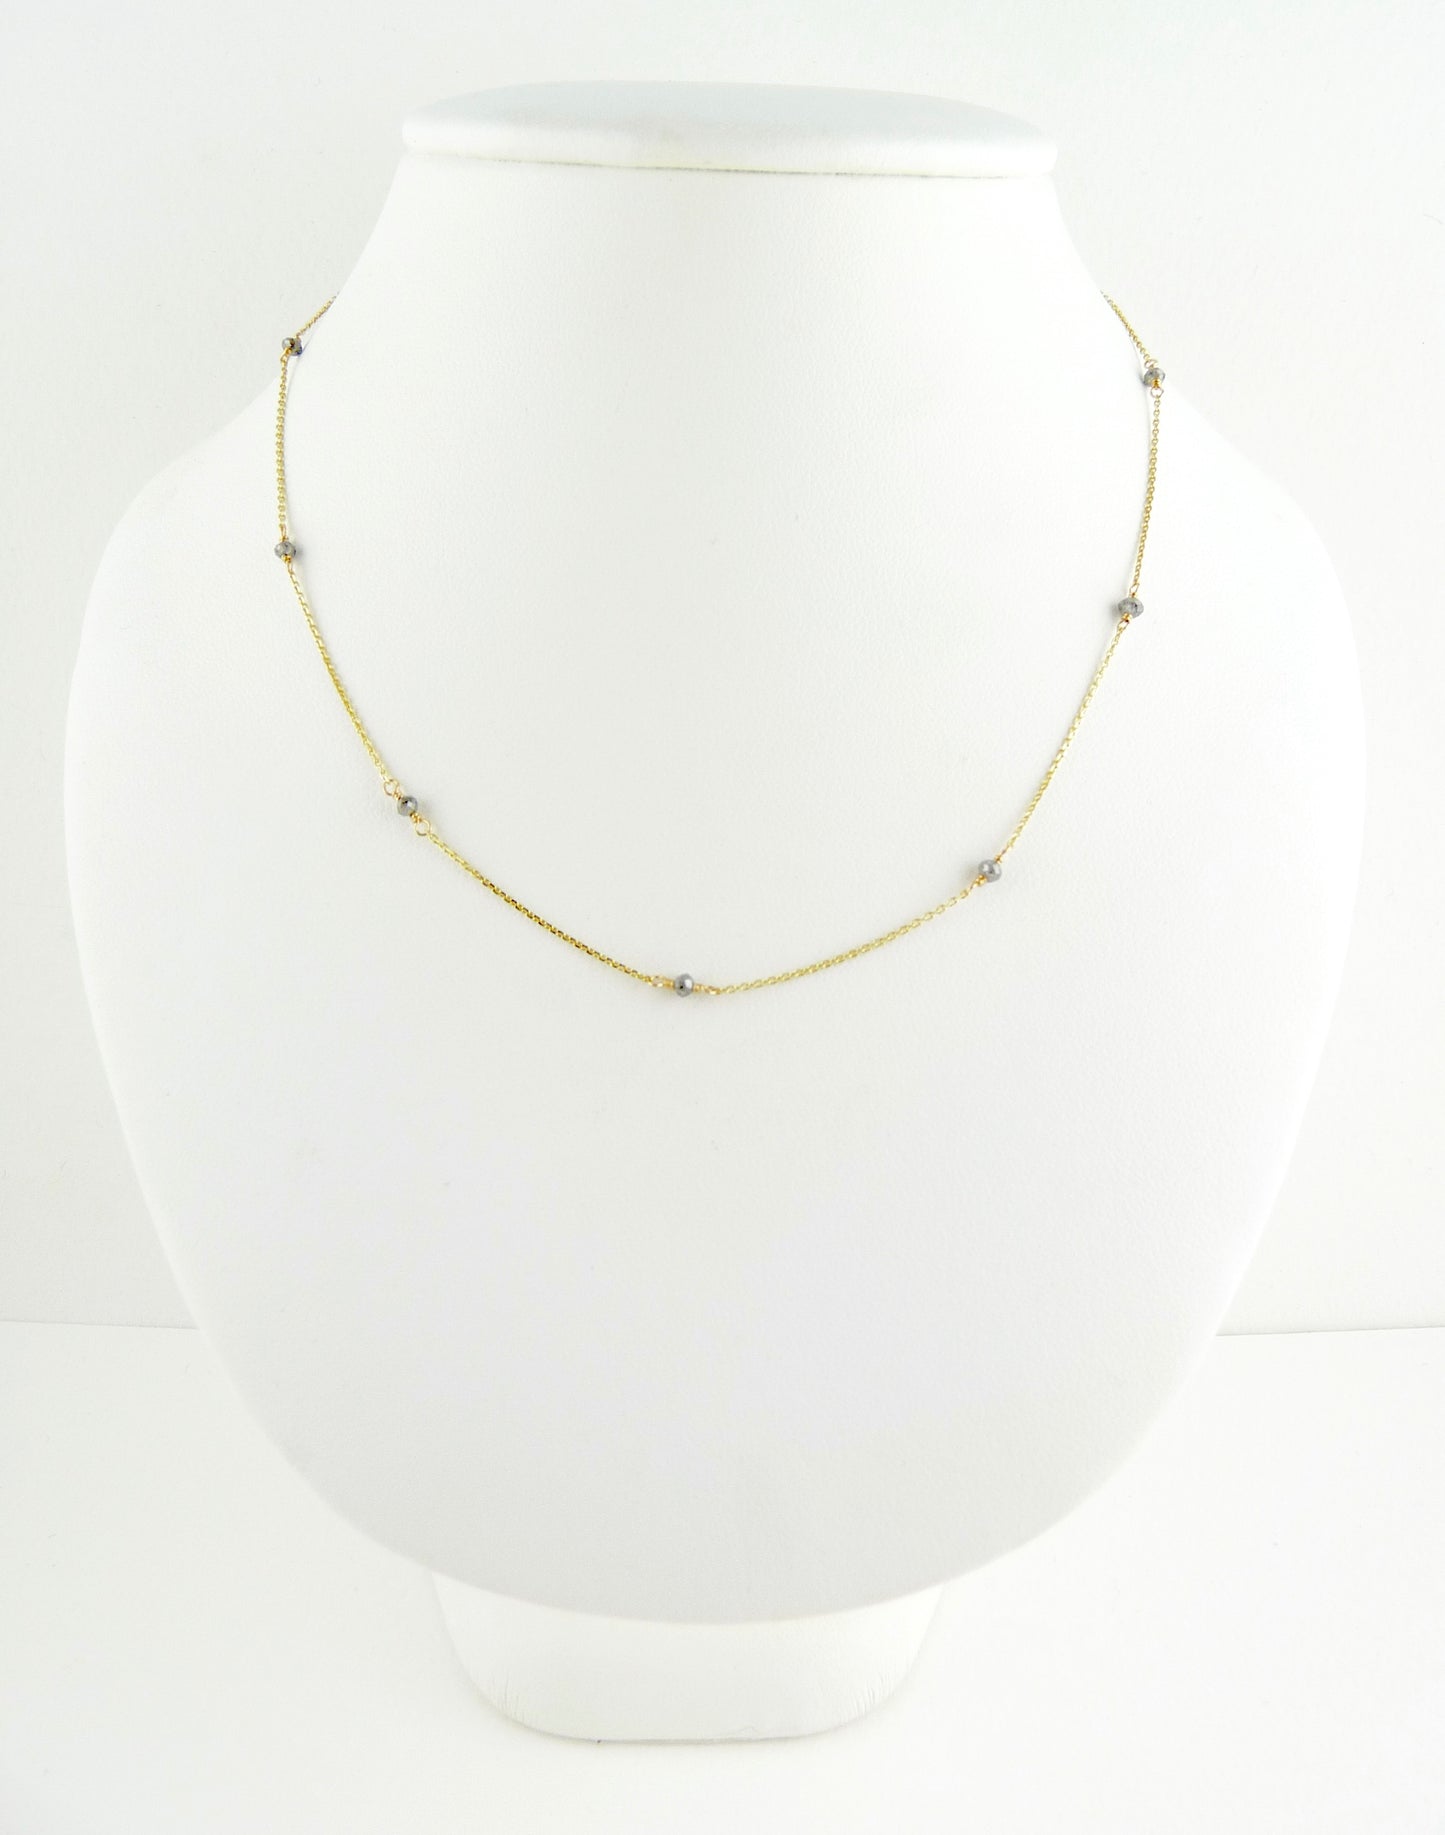 Delicate Gold chain sprinkled with grey diamonds